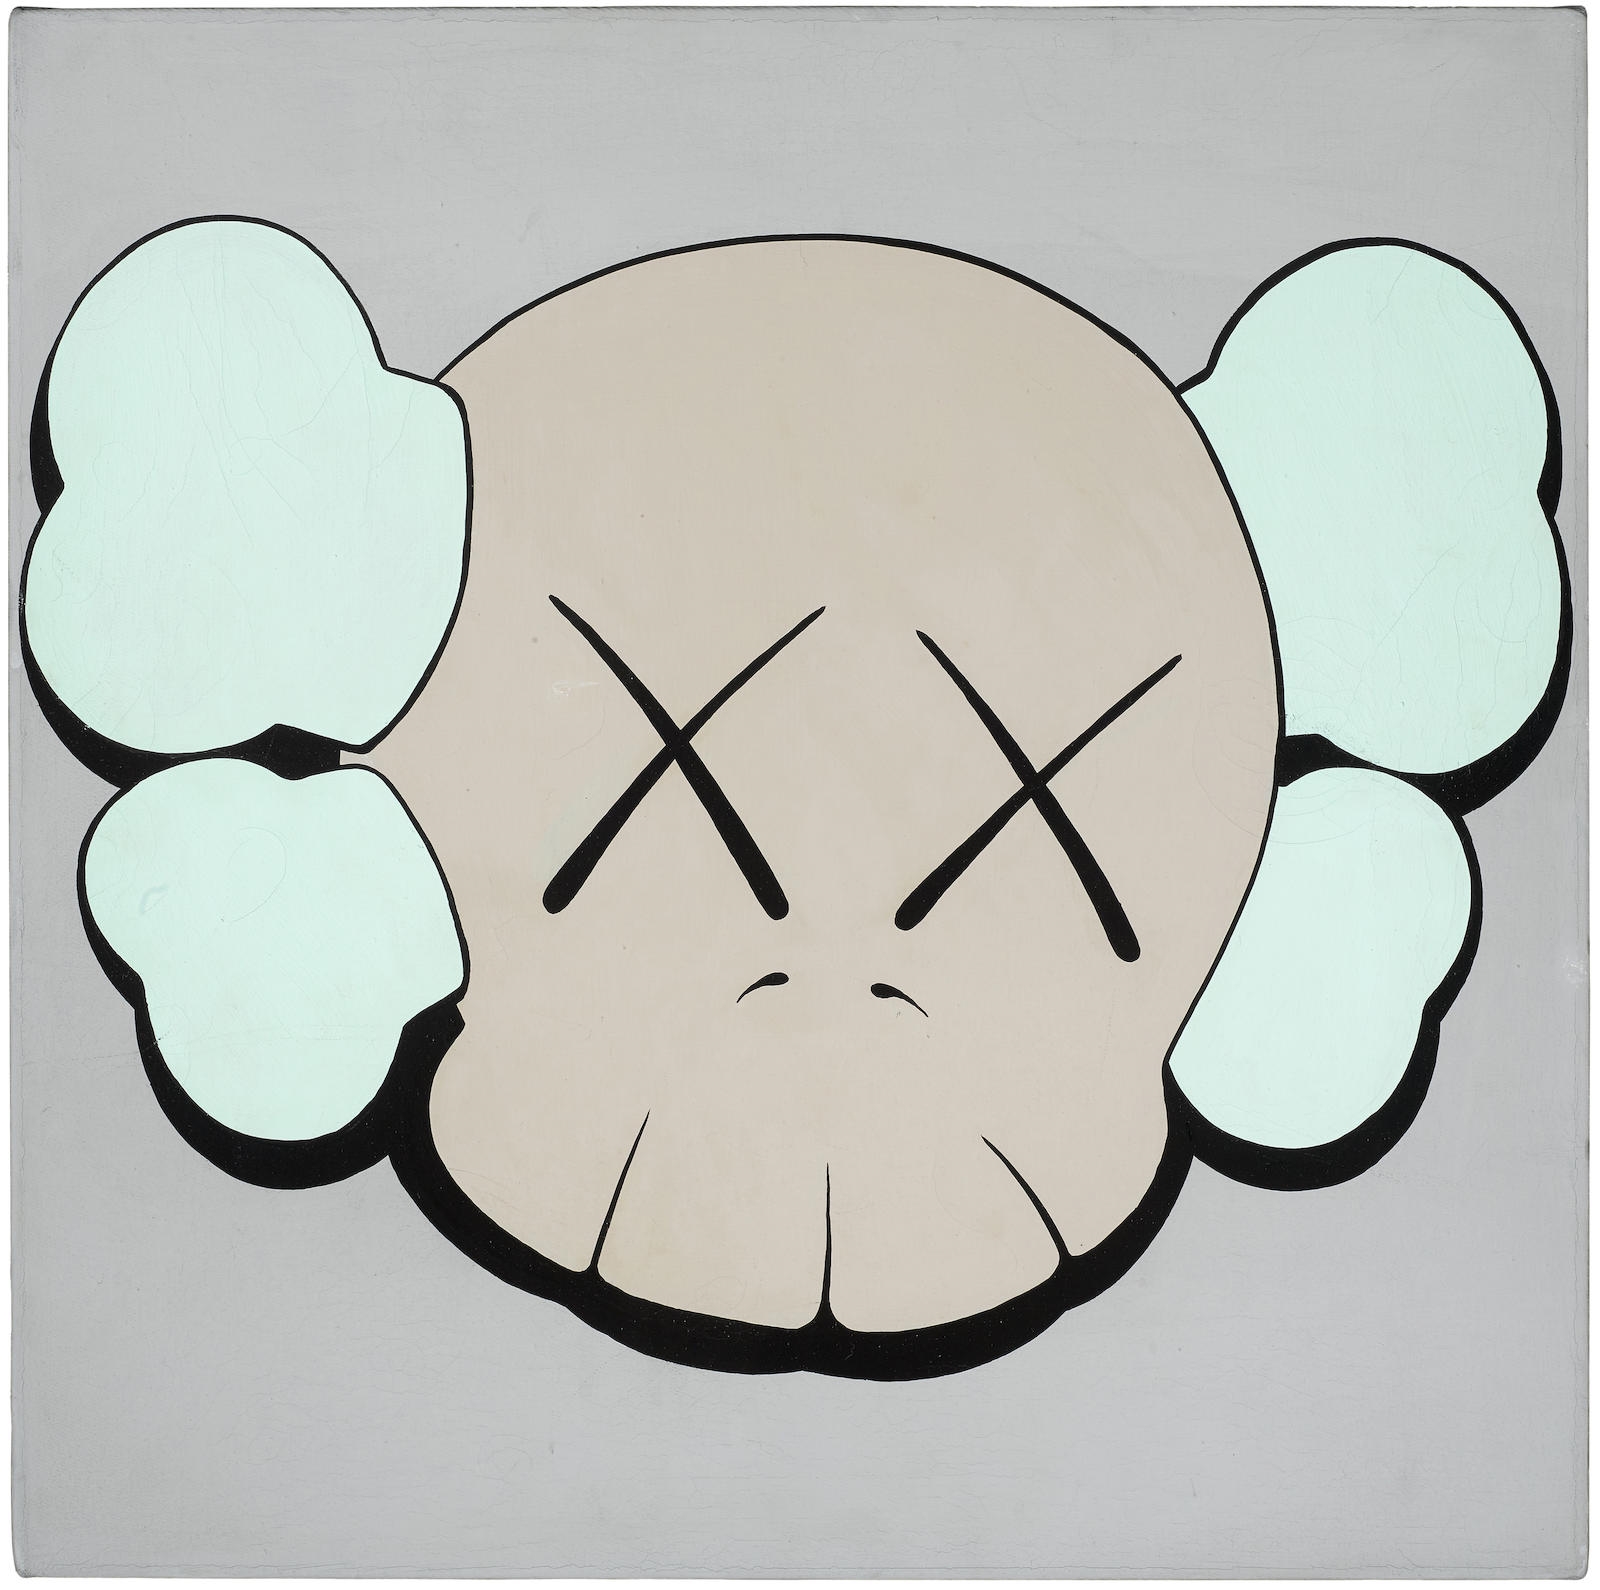 Untitled by KAWS, 2000